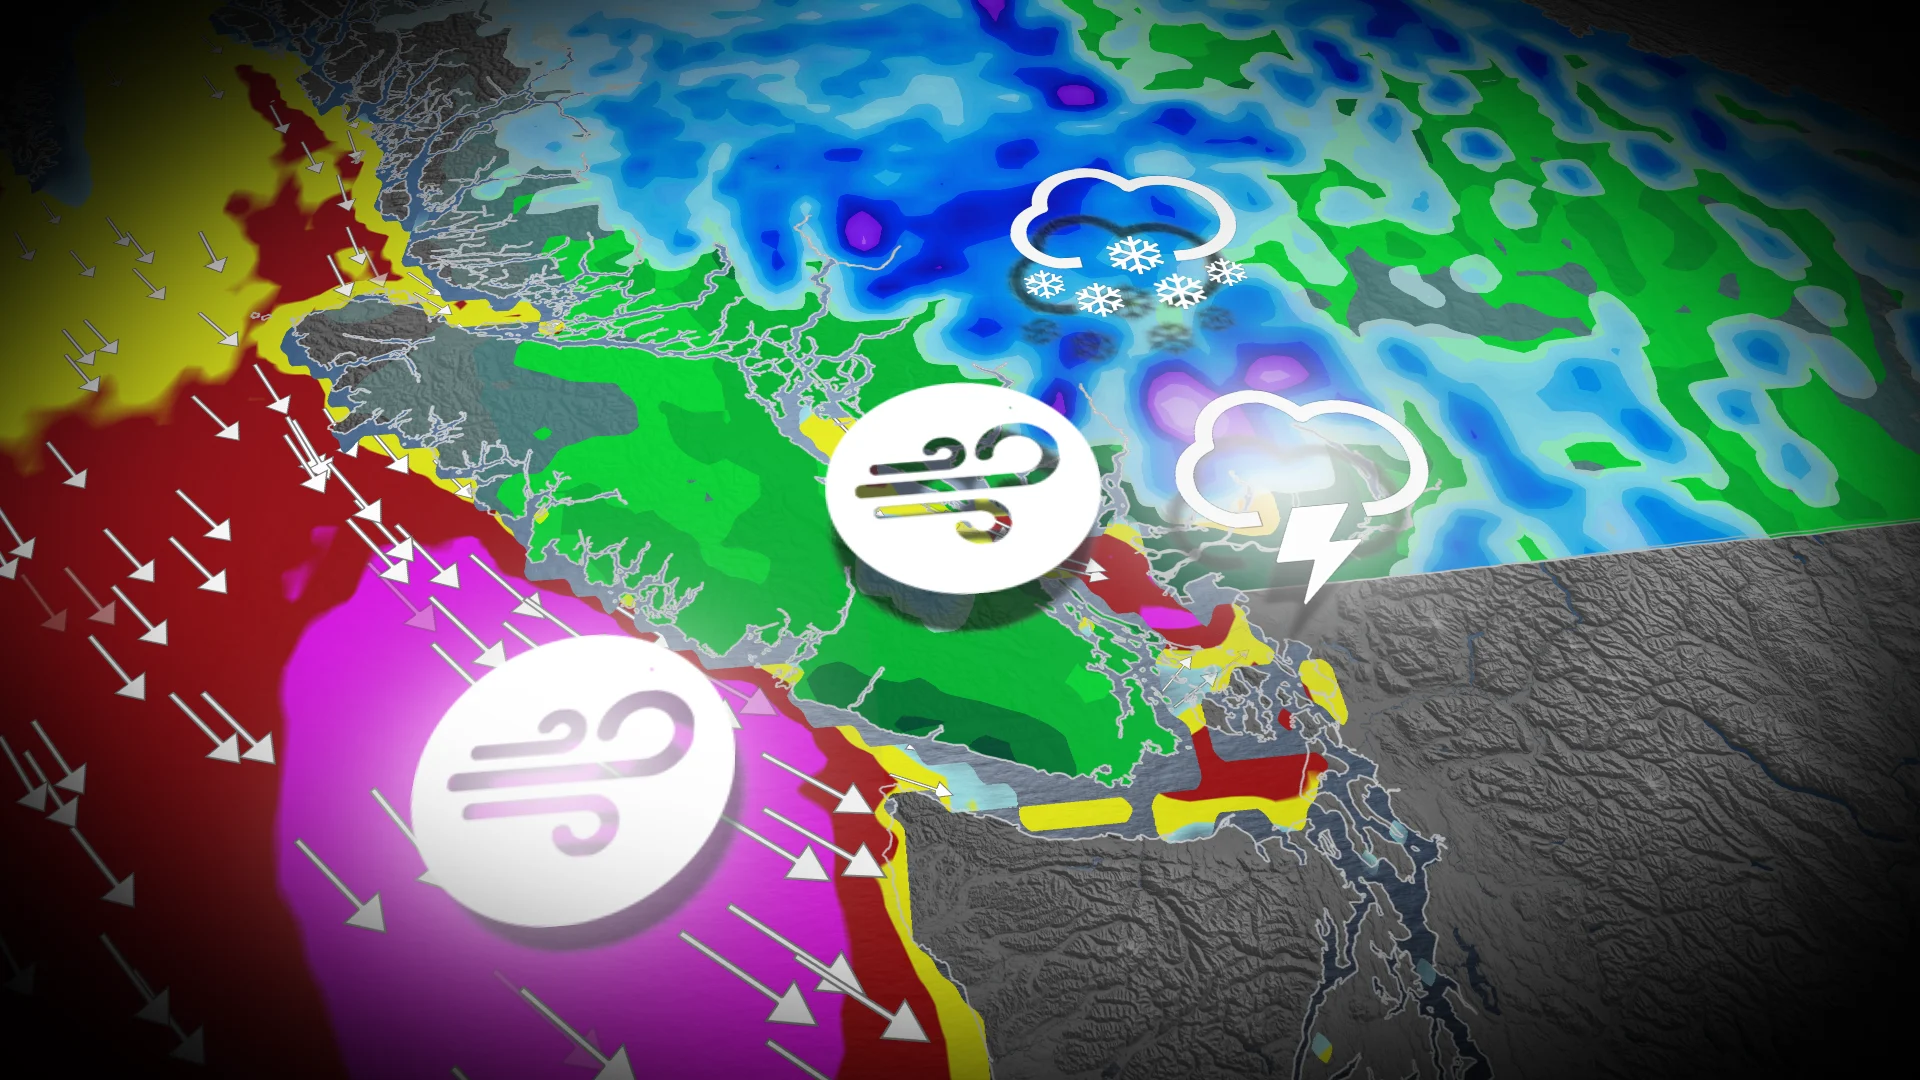 After some overnight thunder and snow, a renewed storm risk moves into B.C.'s Interior Wednesday. Details, here